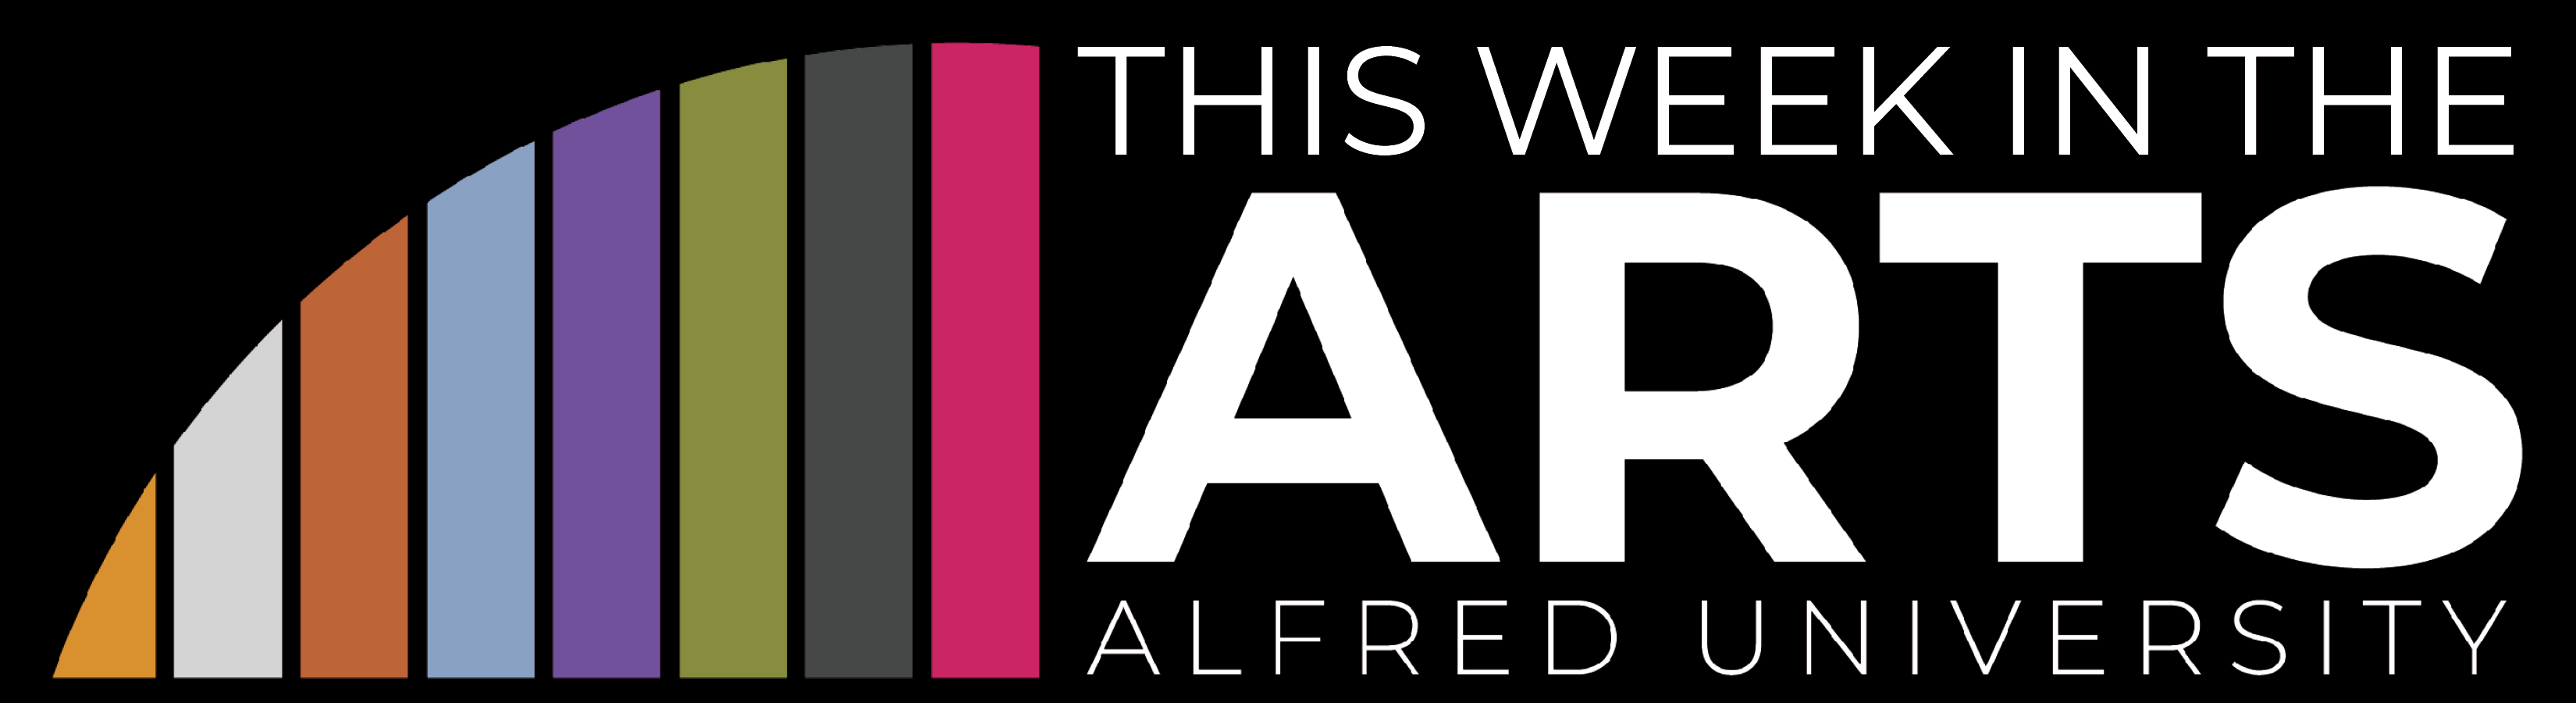 logo this week in the arts